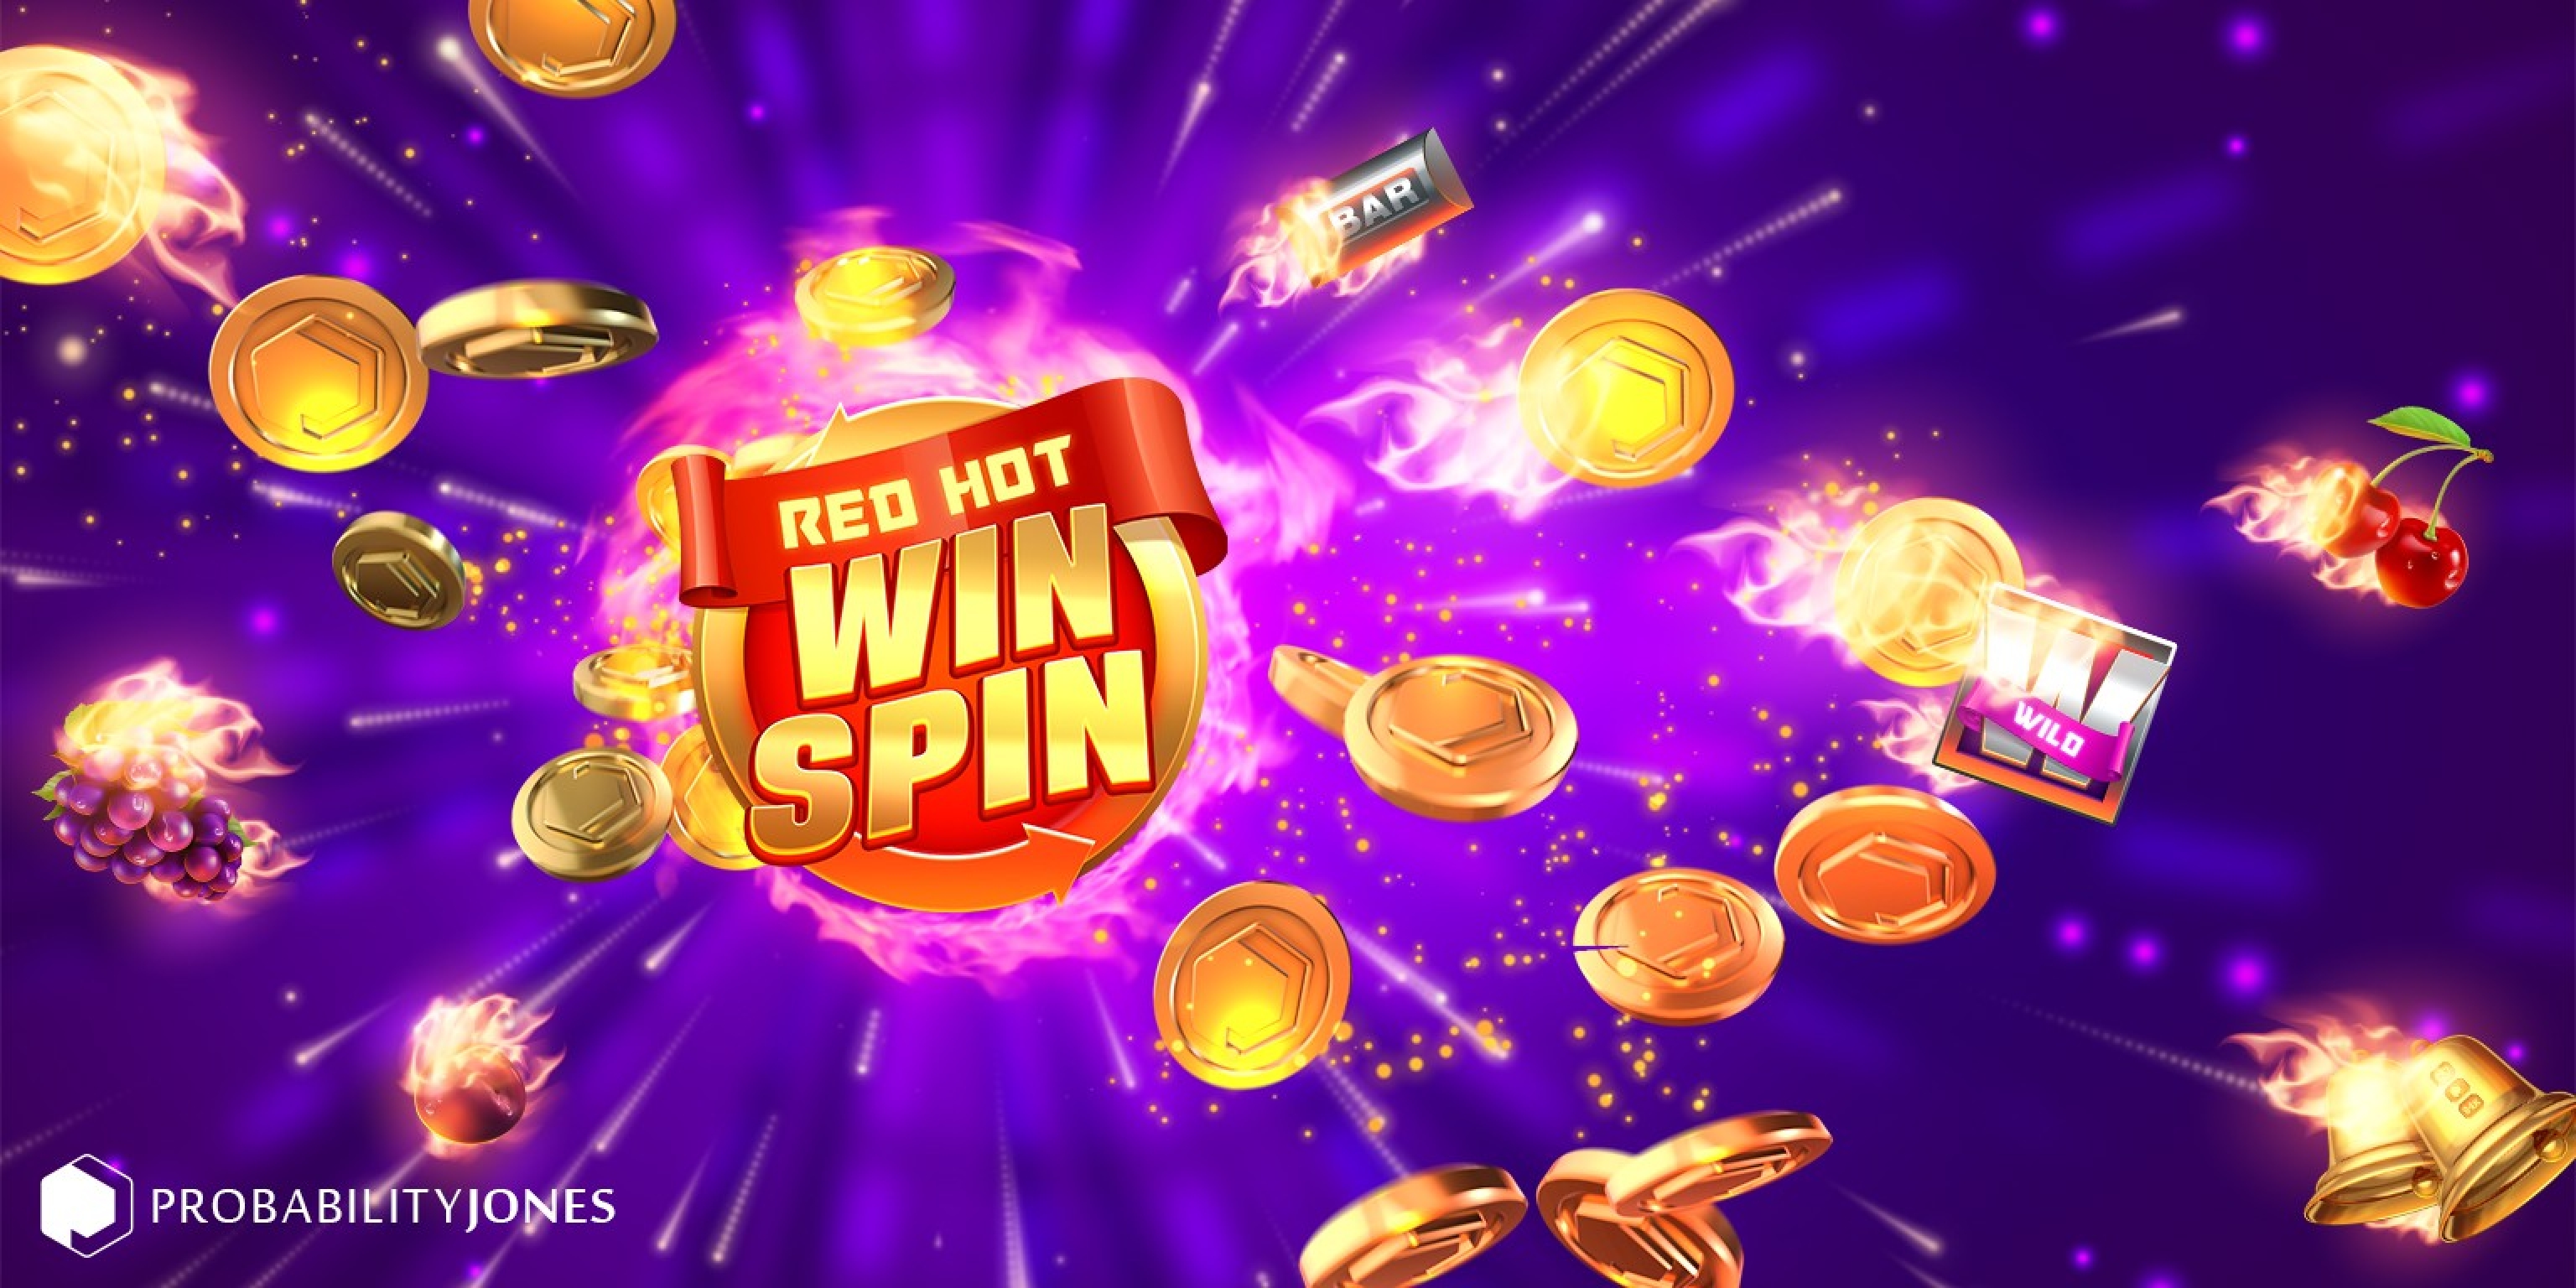 Red Hot Win Spin demo